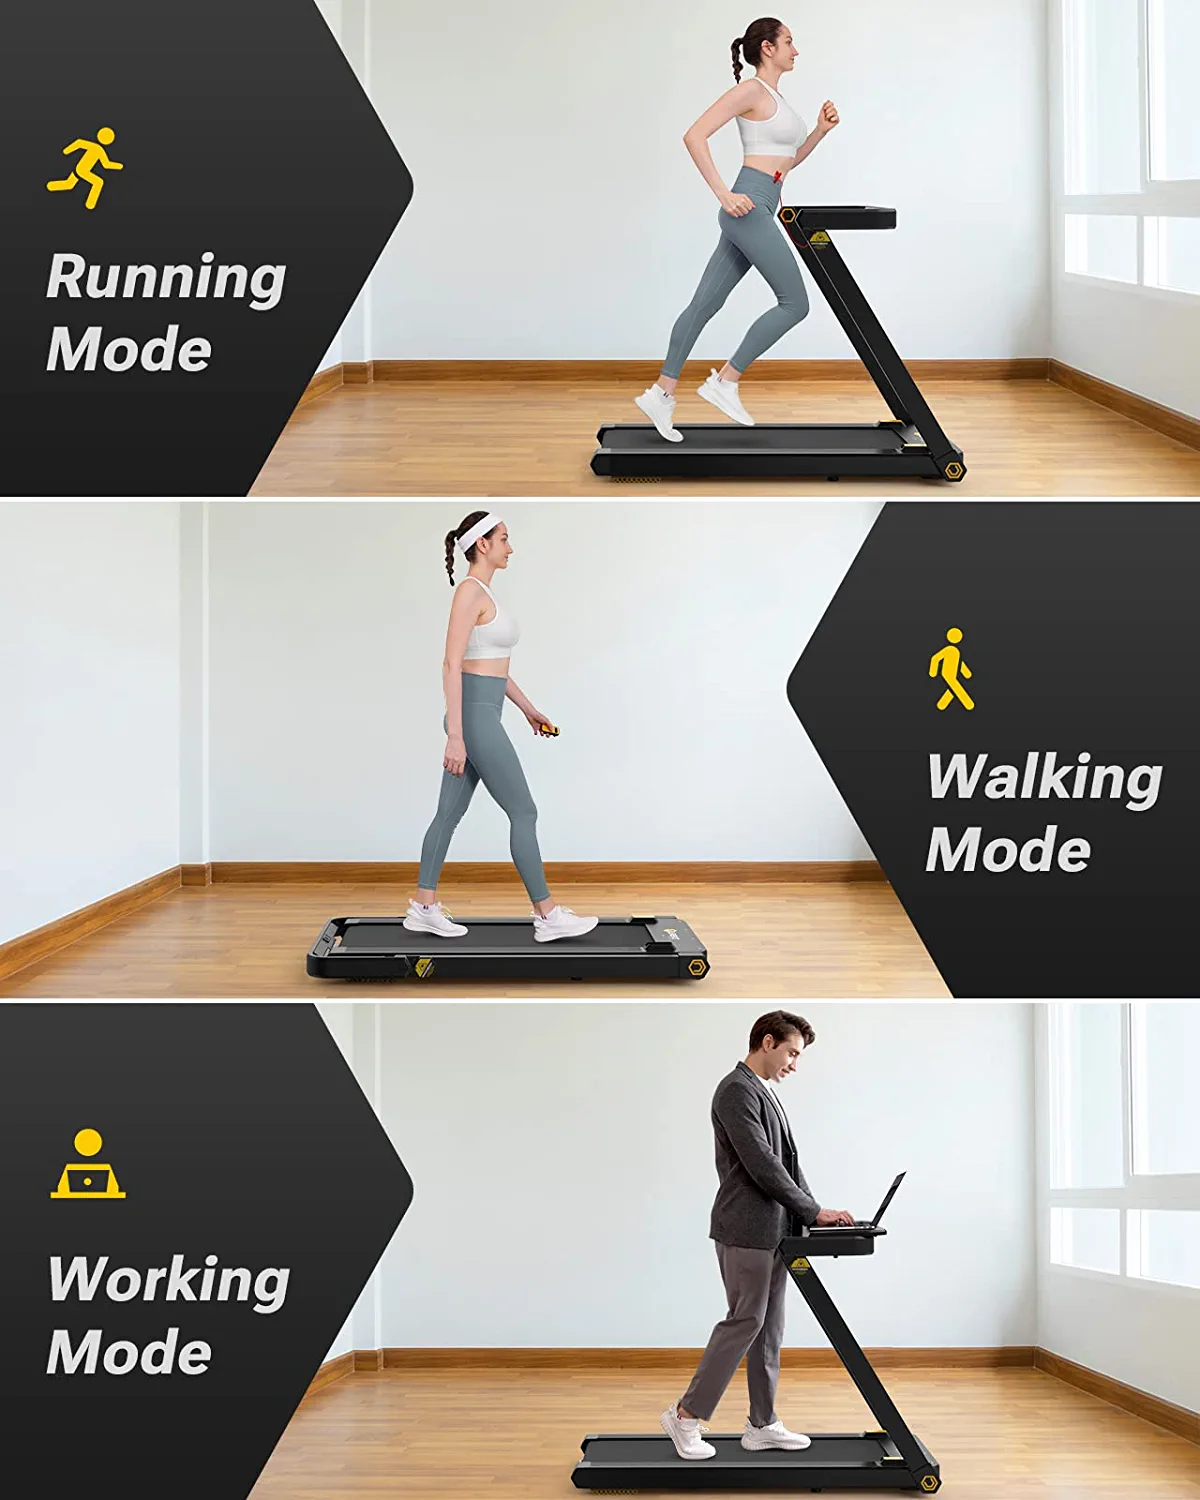 UREVO 3-in-1 Foldable Treadmill with Removable Desk modes